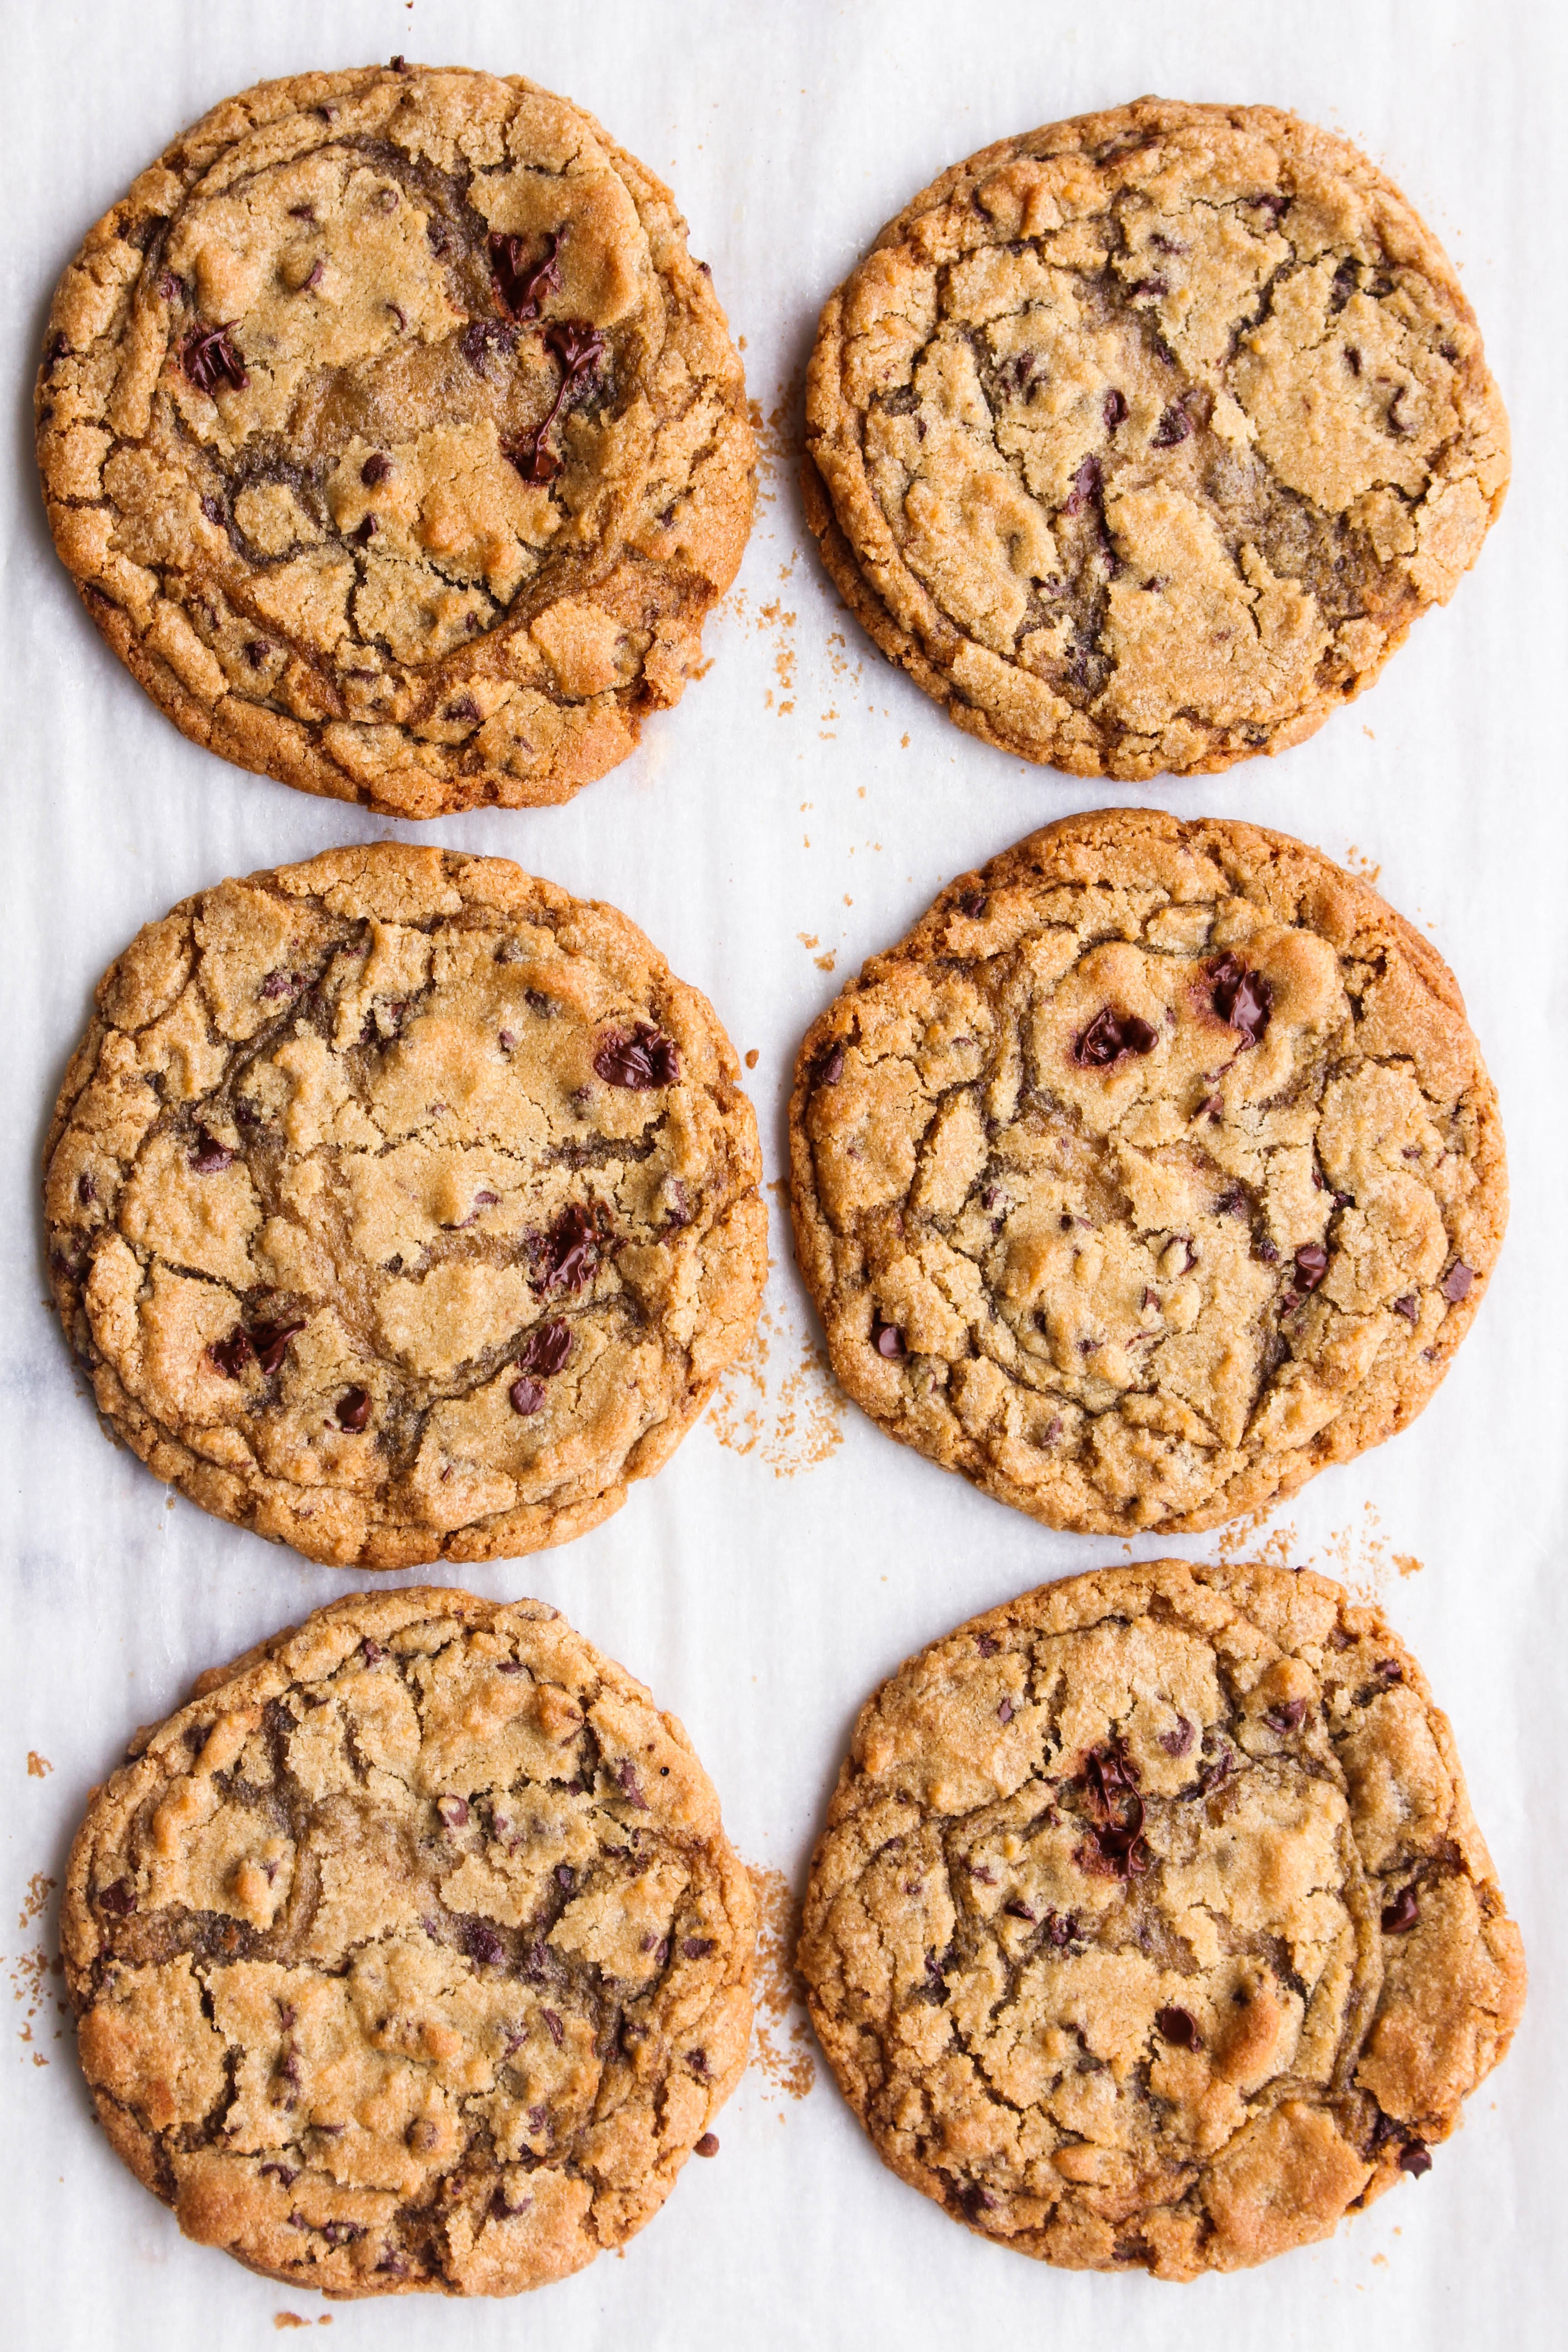 Giant Crackly Chocolate Chip Cookies - The Sweet and Simple Kitchen